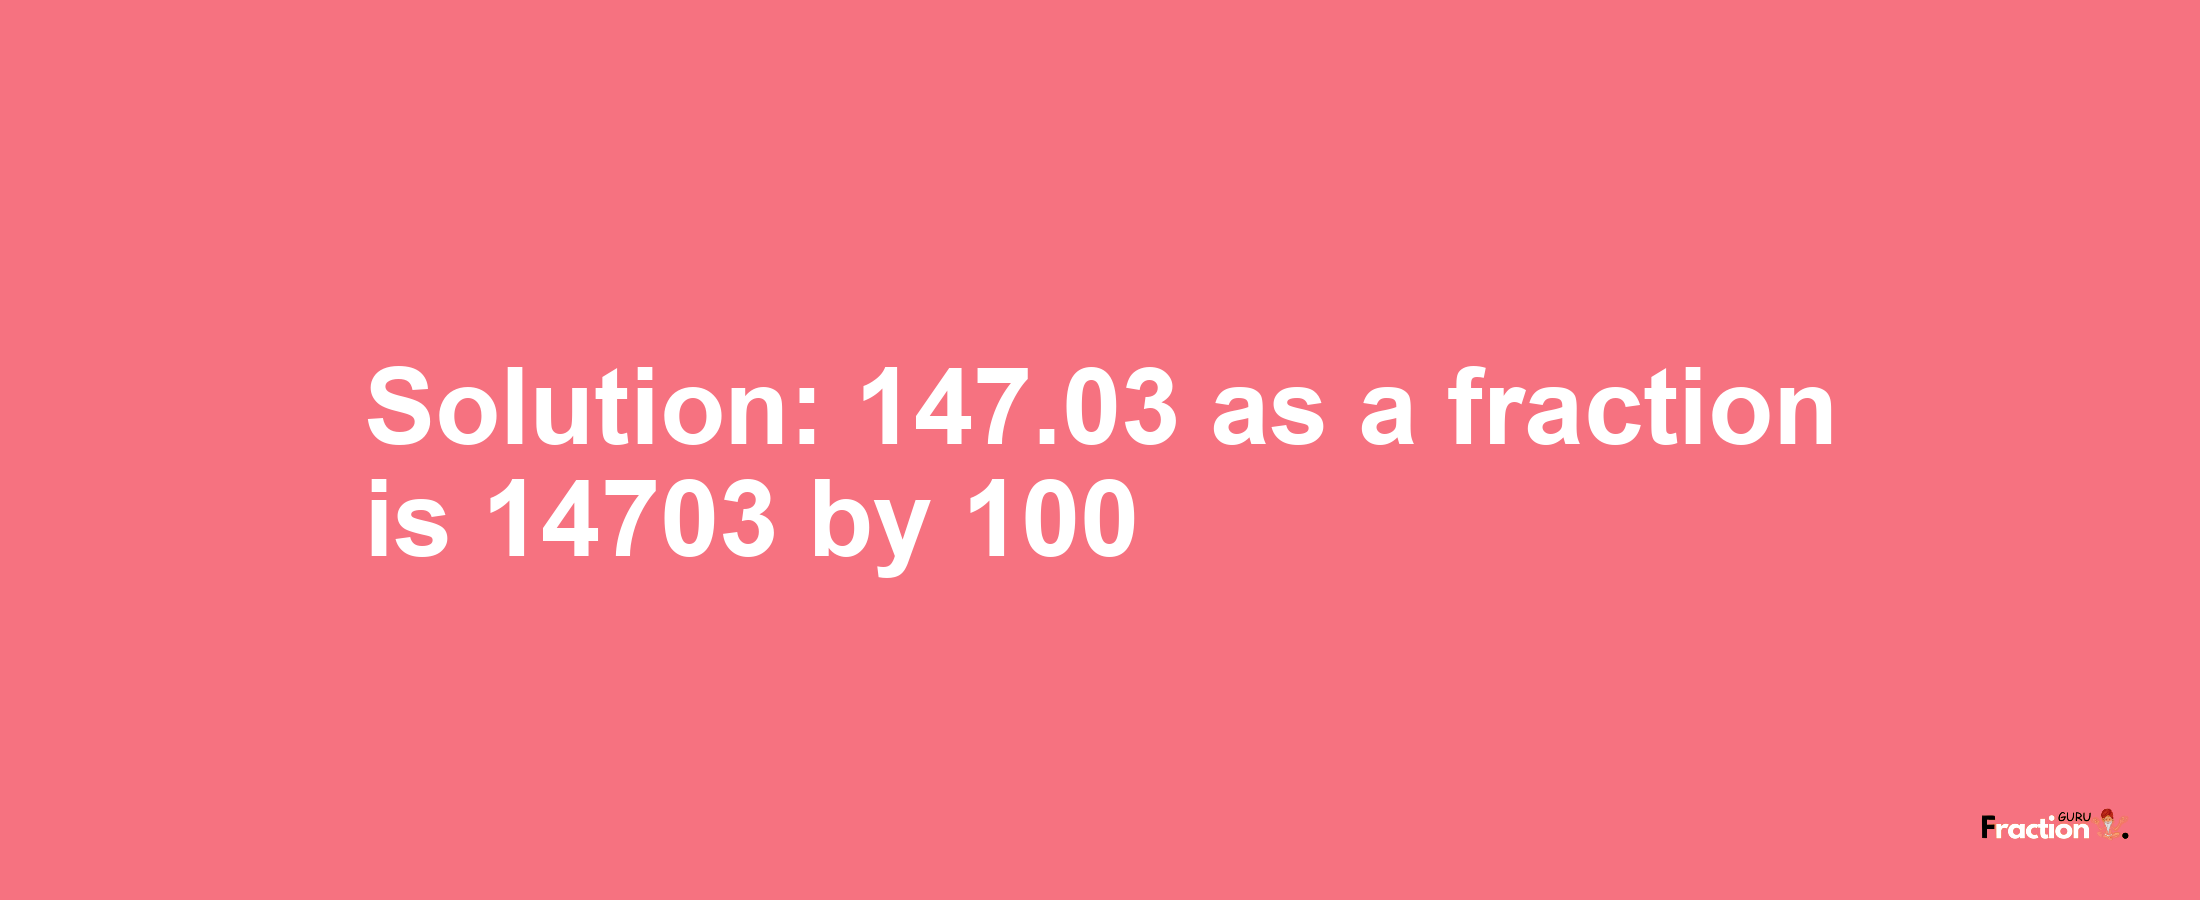 Solution:147.03 as a fraction is 14703/100